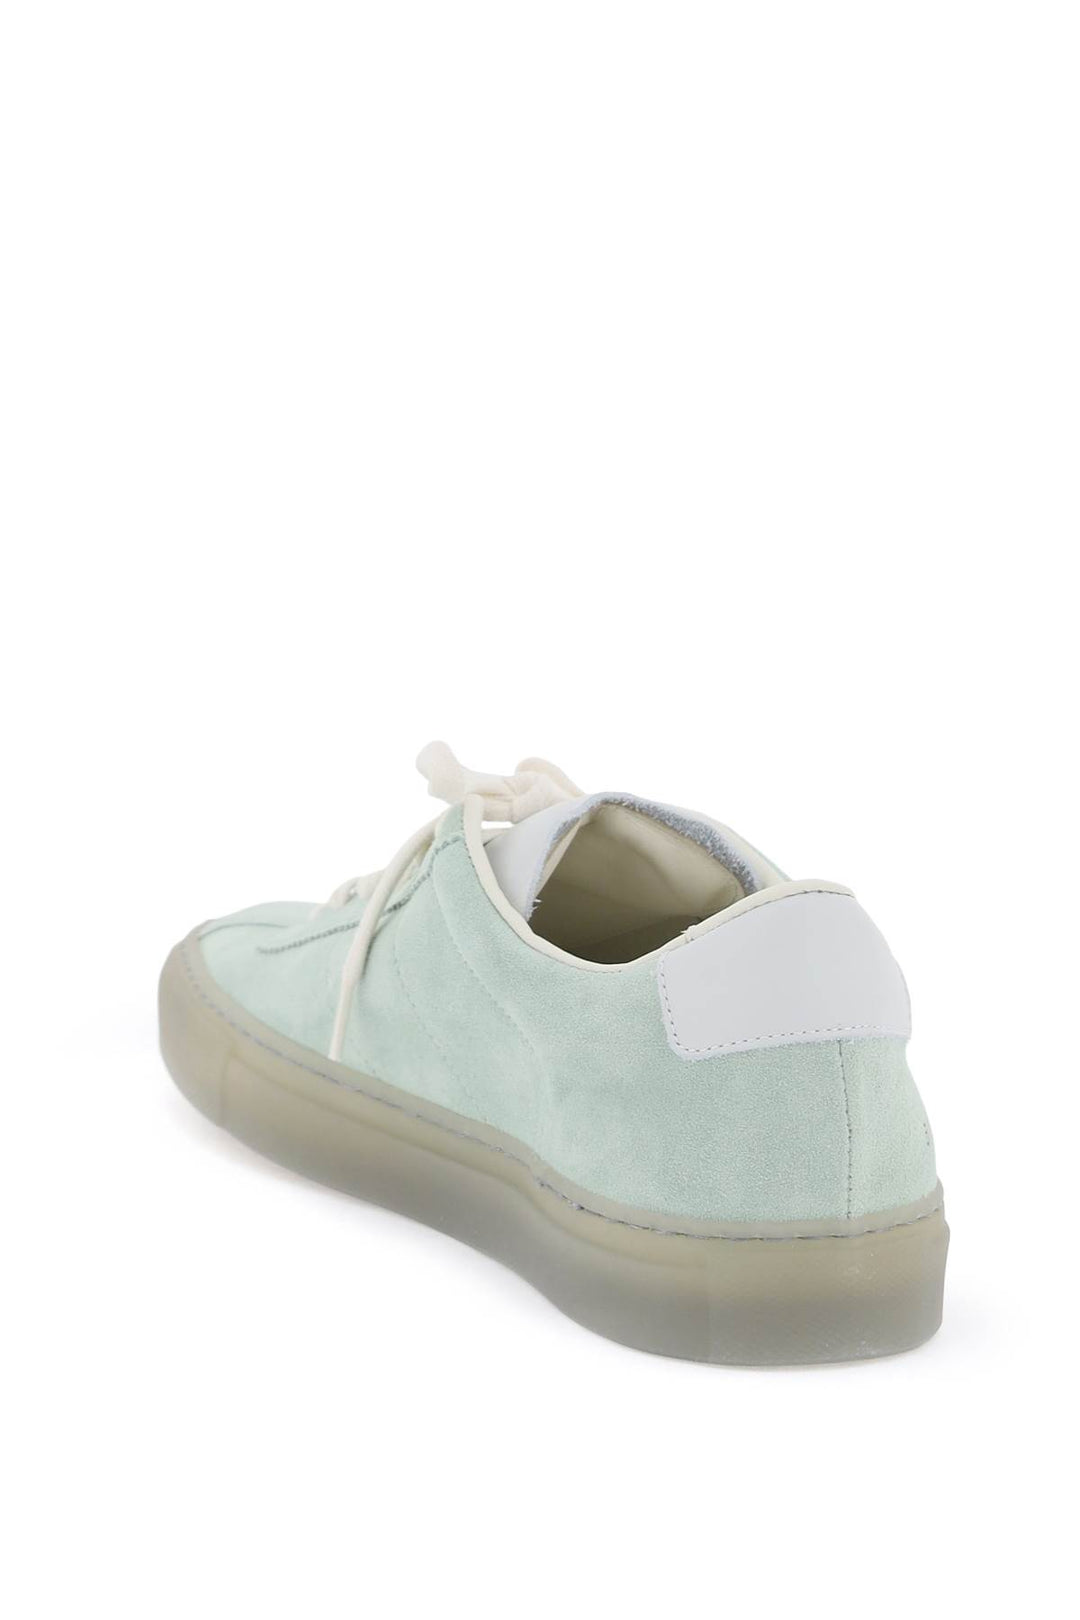 Common Projects Suede Leather Sneakers For Men   Verde